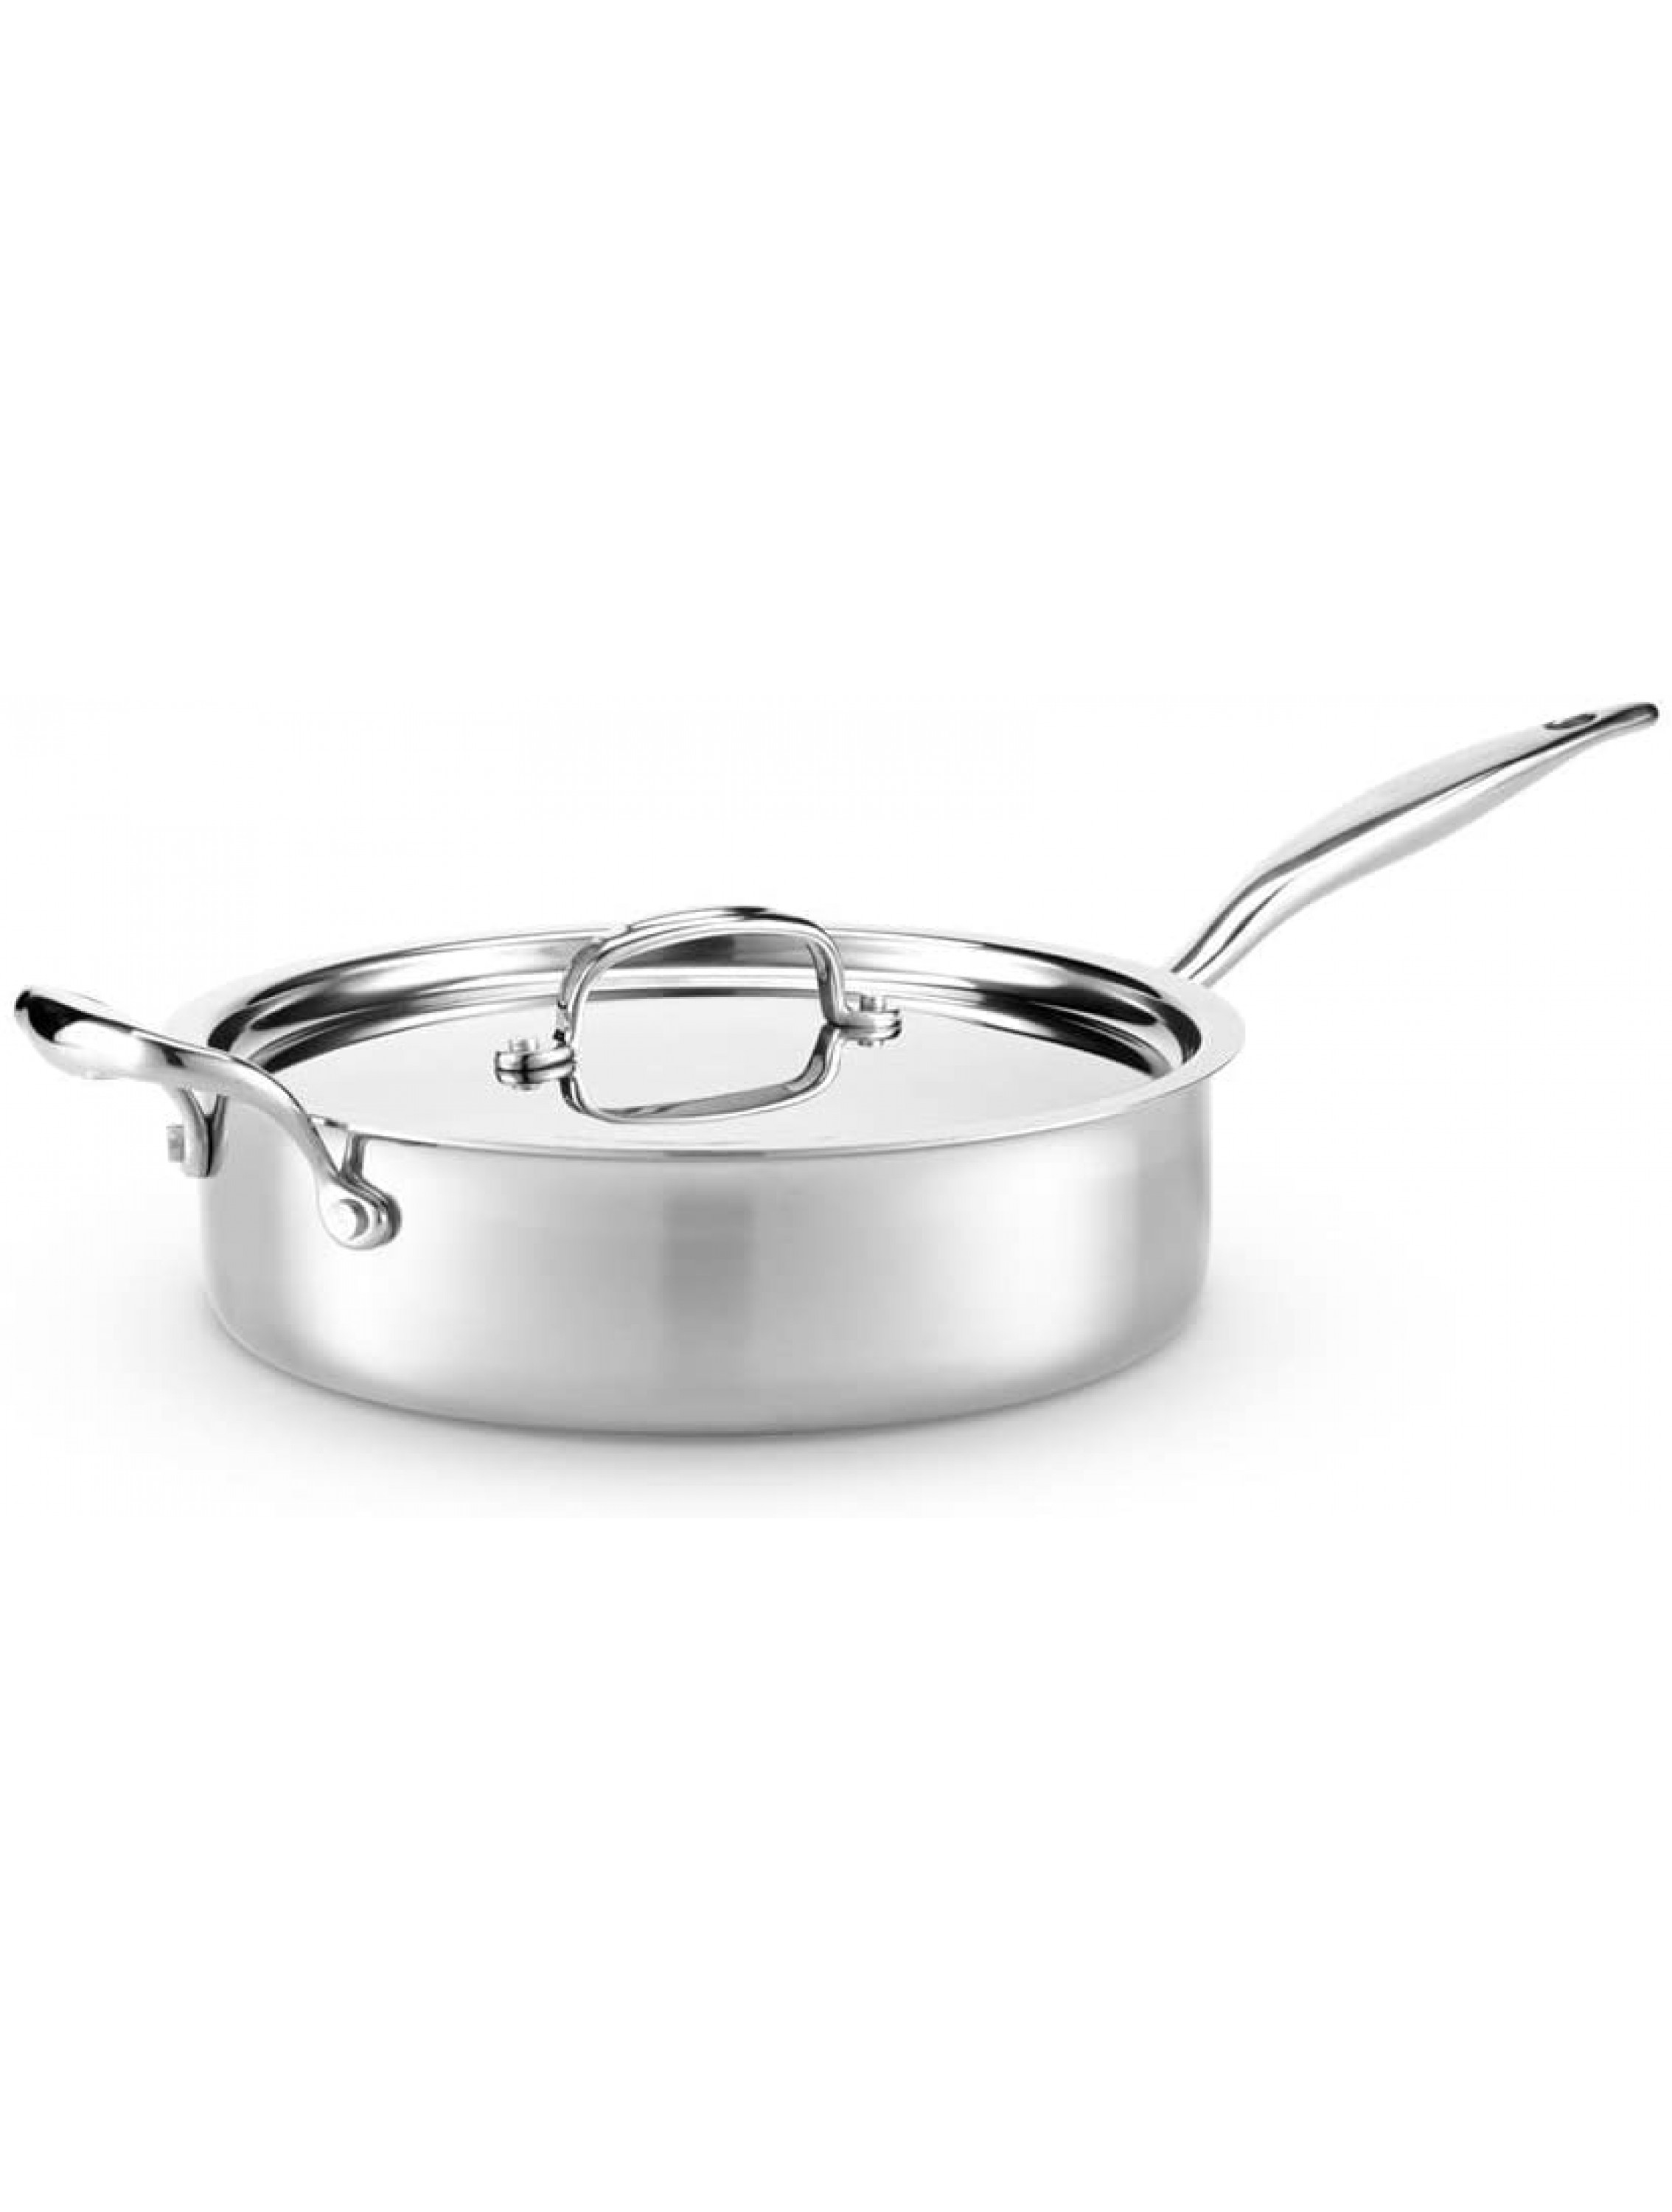 Heritage Steel 4 Quart Sauté Pan with Lid Titanium Strengthened 316Ti Stainless Steel with 5-Ply Construction Induction-Ready and Fully Clad Made in USA - BAY12OFHV